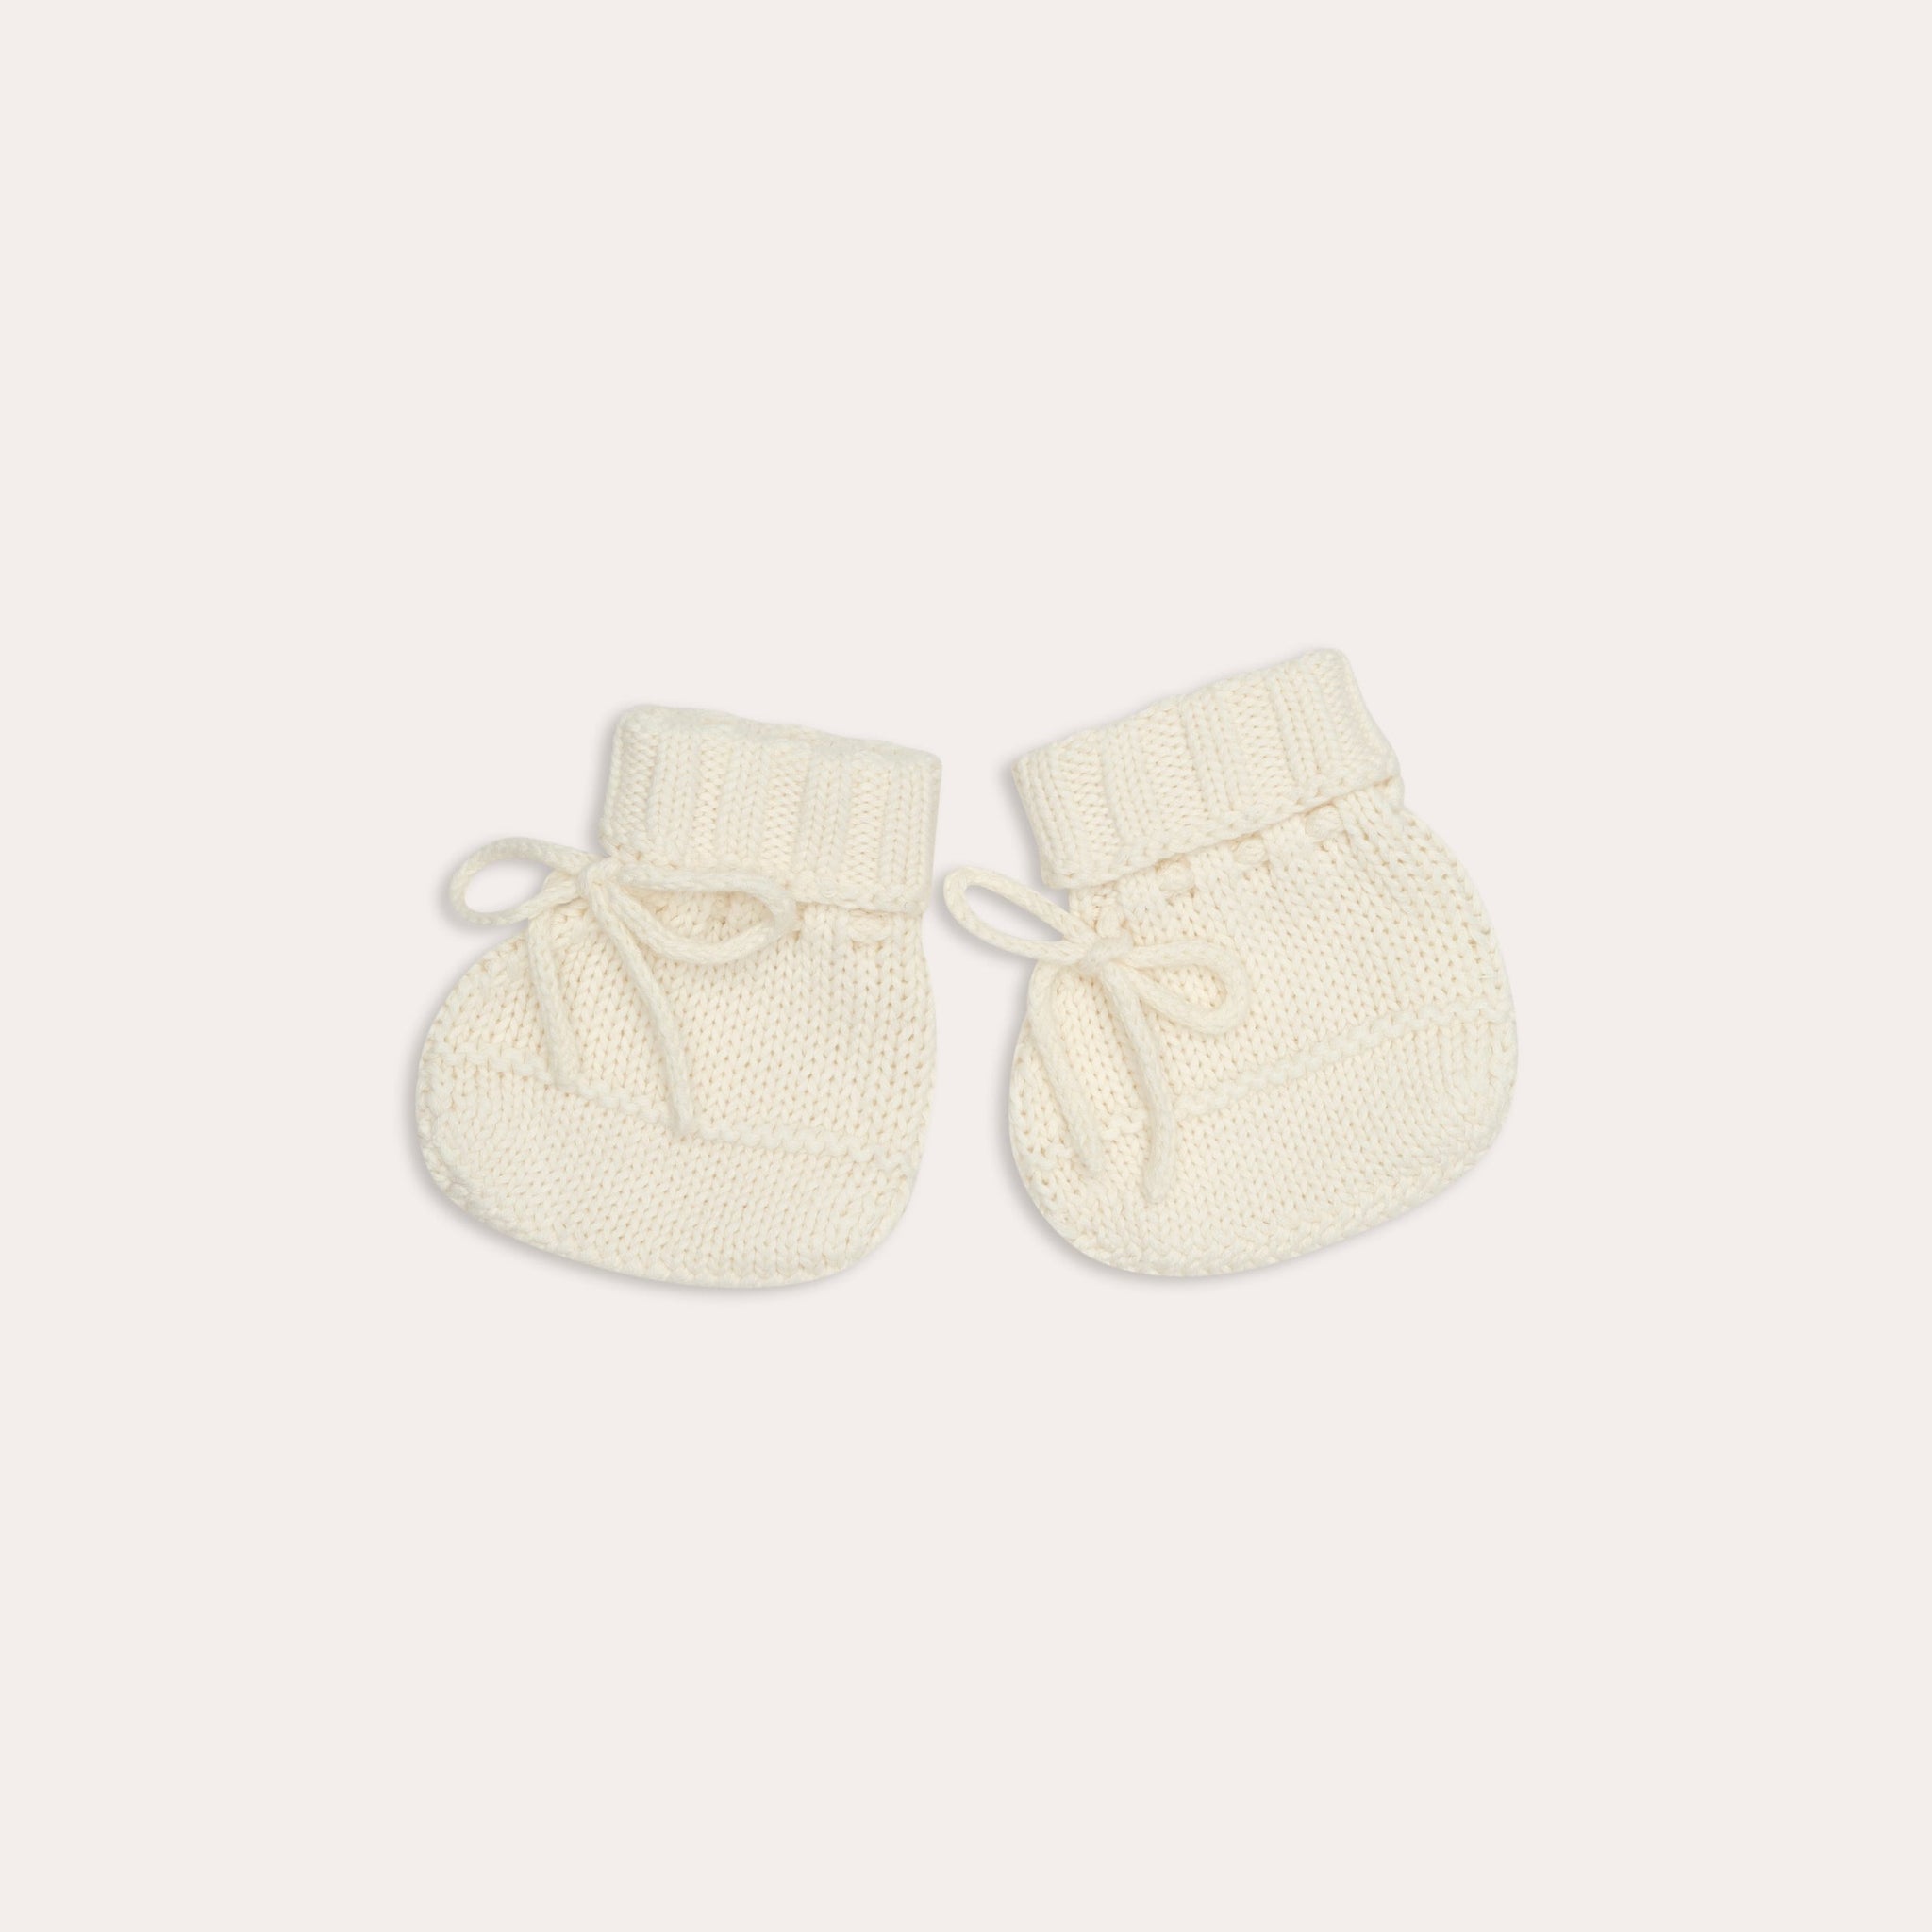 A pair of Illoura the Label knitted alba booties in vanilla on a white surface.